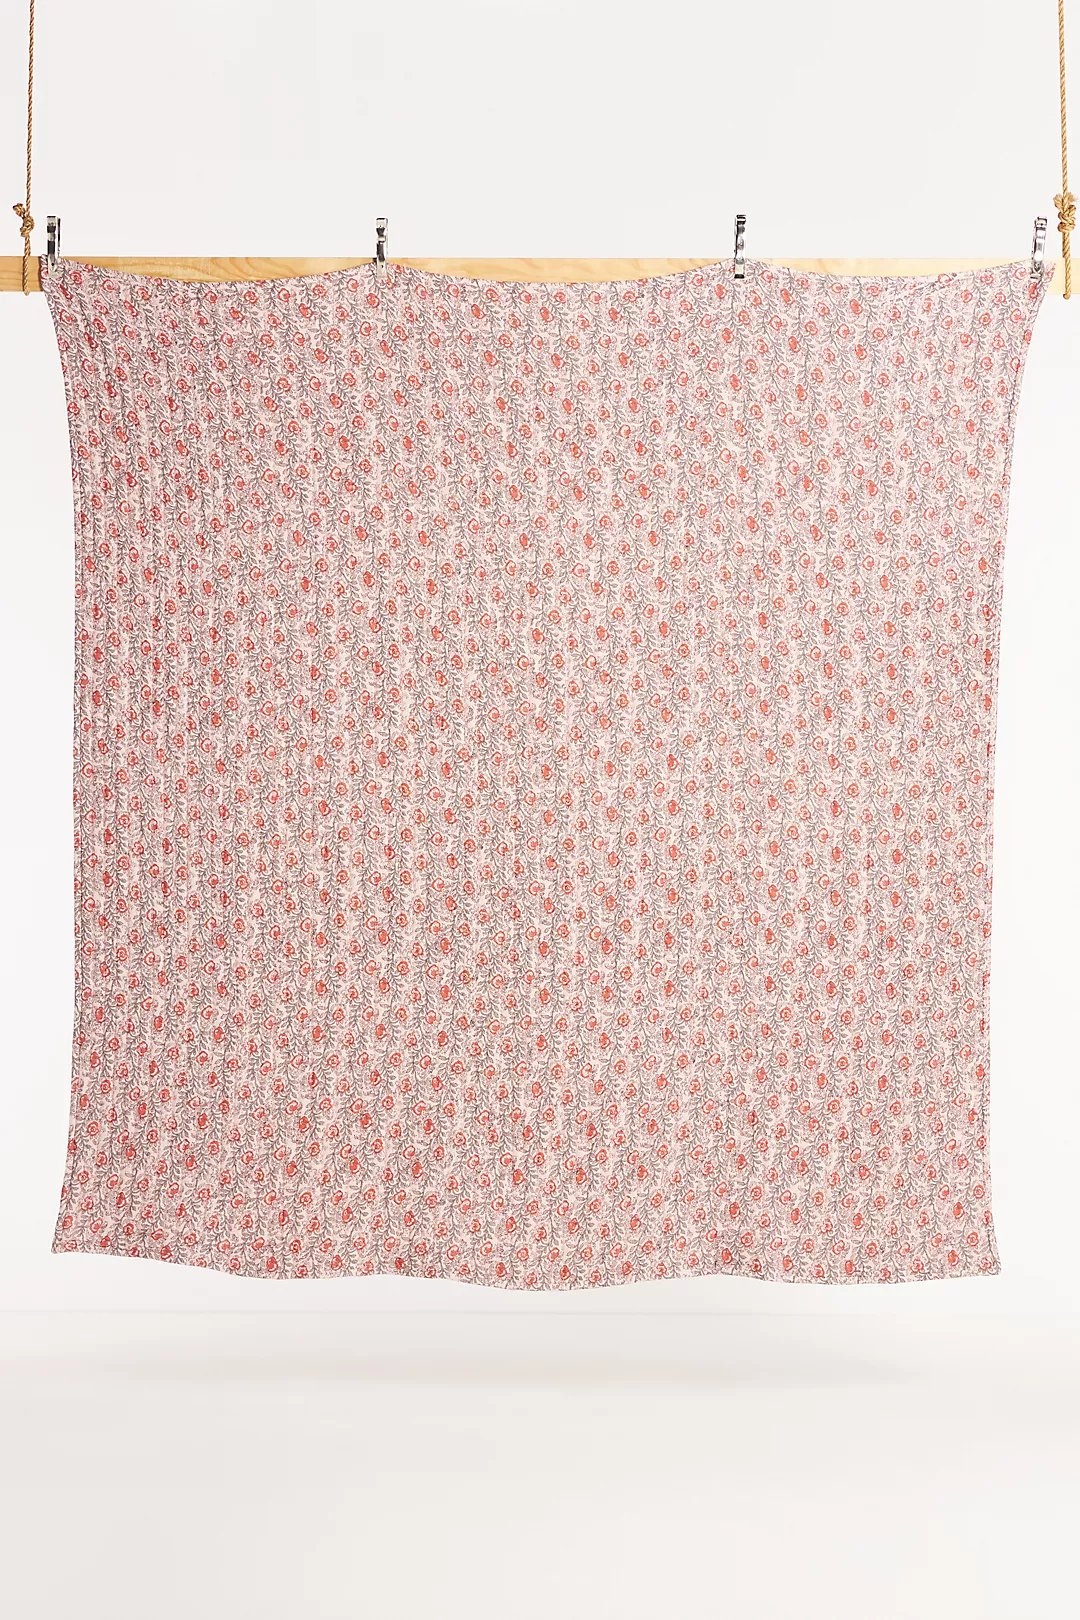 Rowena Coverlet By Amber Lewis for Anthropologie in Pink, King - Image 0